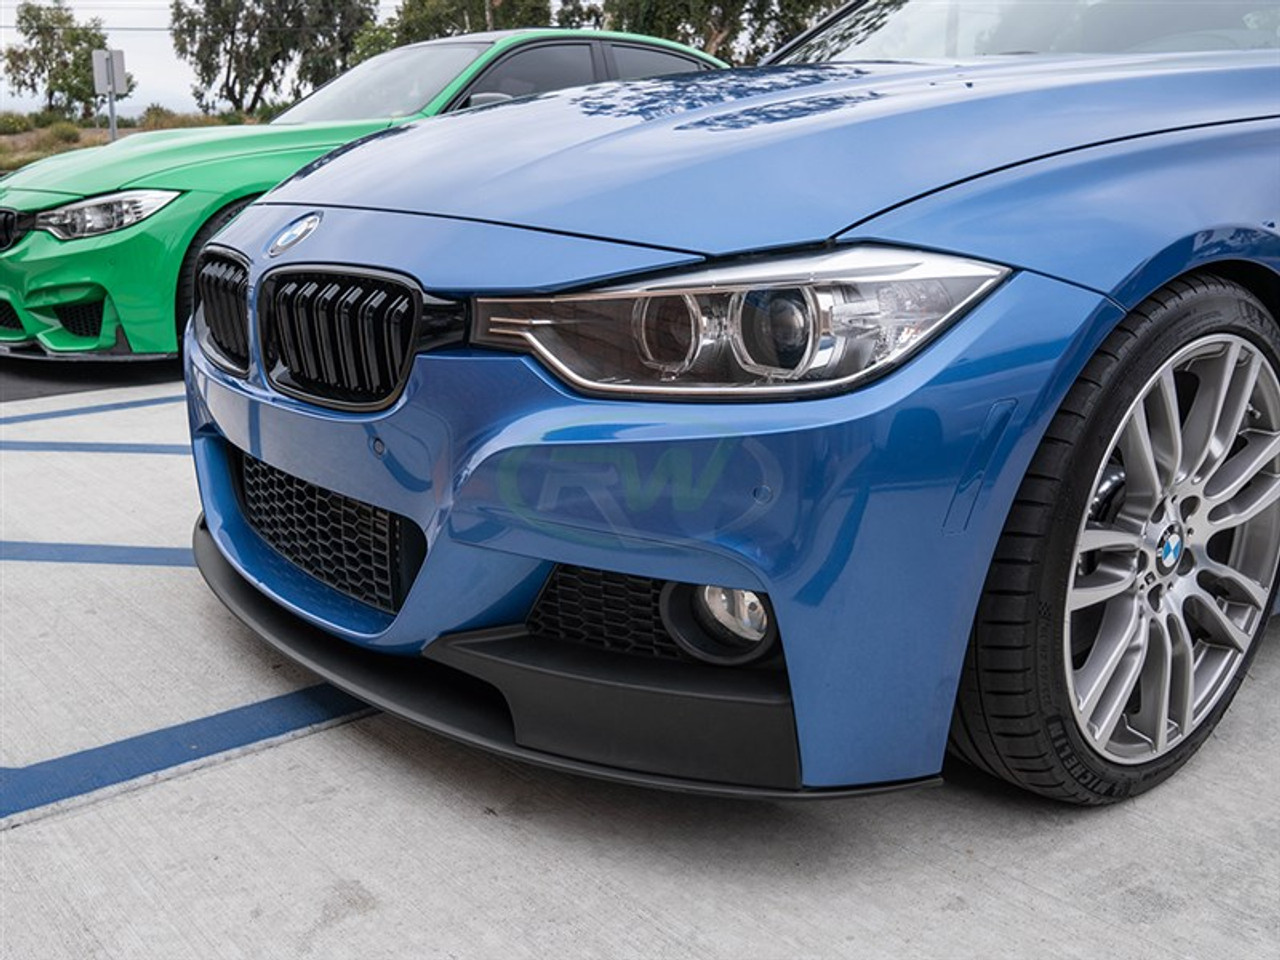 RW Carbon BMW F30/F31 Performance Style Front Lip Spoiler bmwf30014 -  Extreme Power House